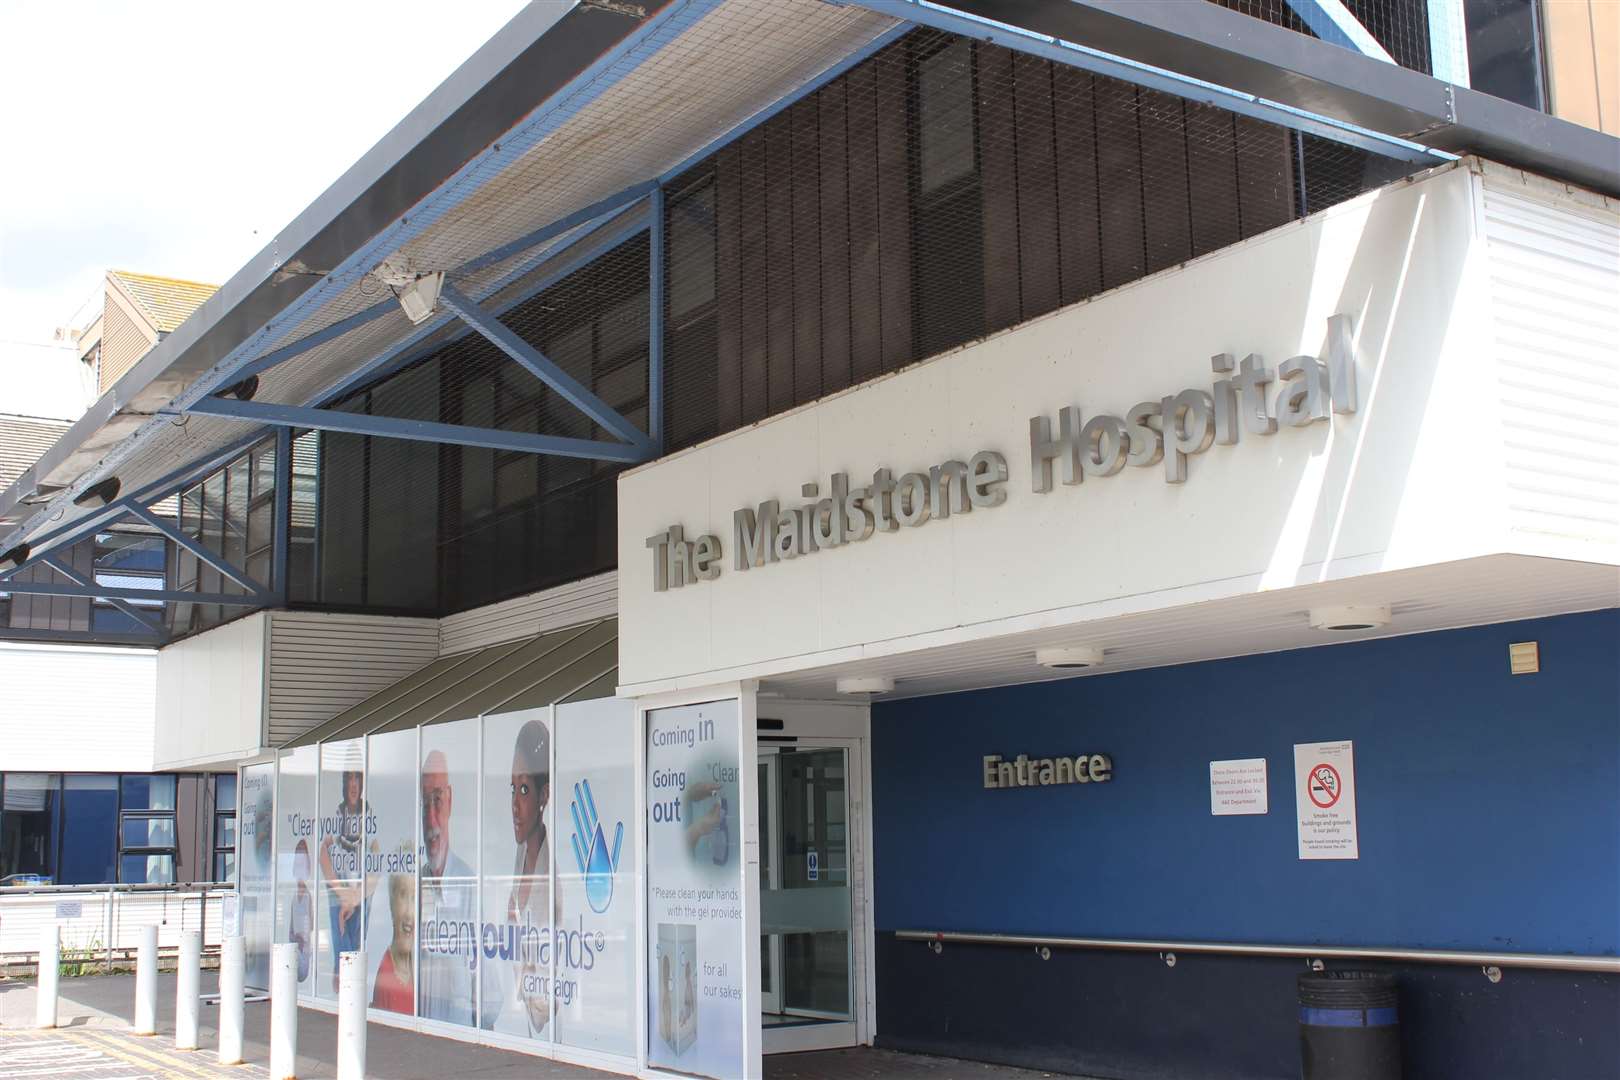 Under the plan approved by KCC, one of the stroke units would be built at Maidstone Hospital